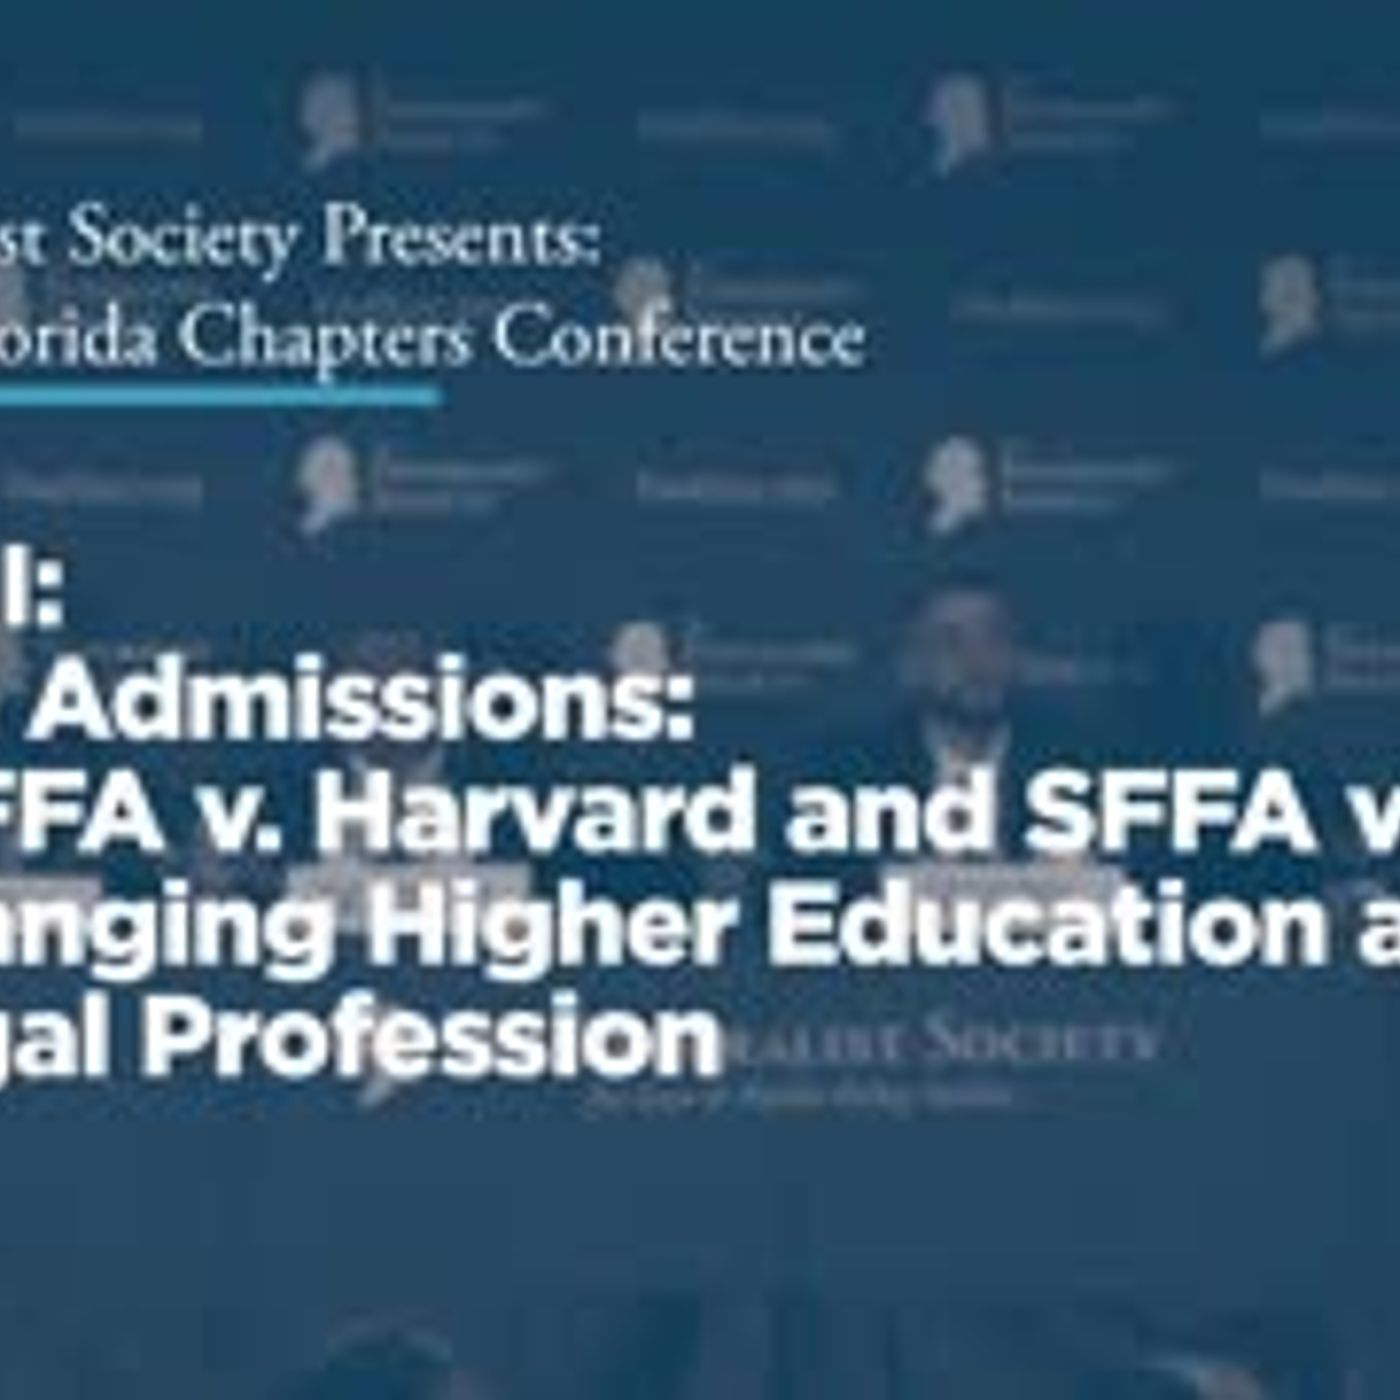 Panel III: Race in Admissions: How SFFA v. Harvard and SFFA v. UNC are Changing Higher Education and the Legal Profession